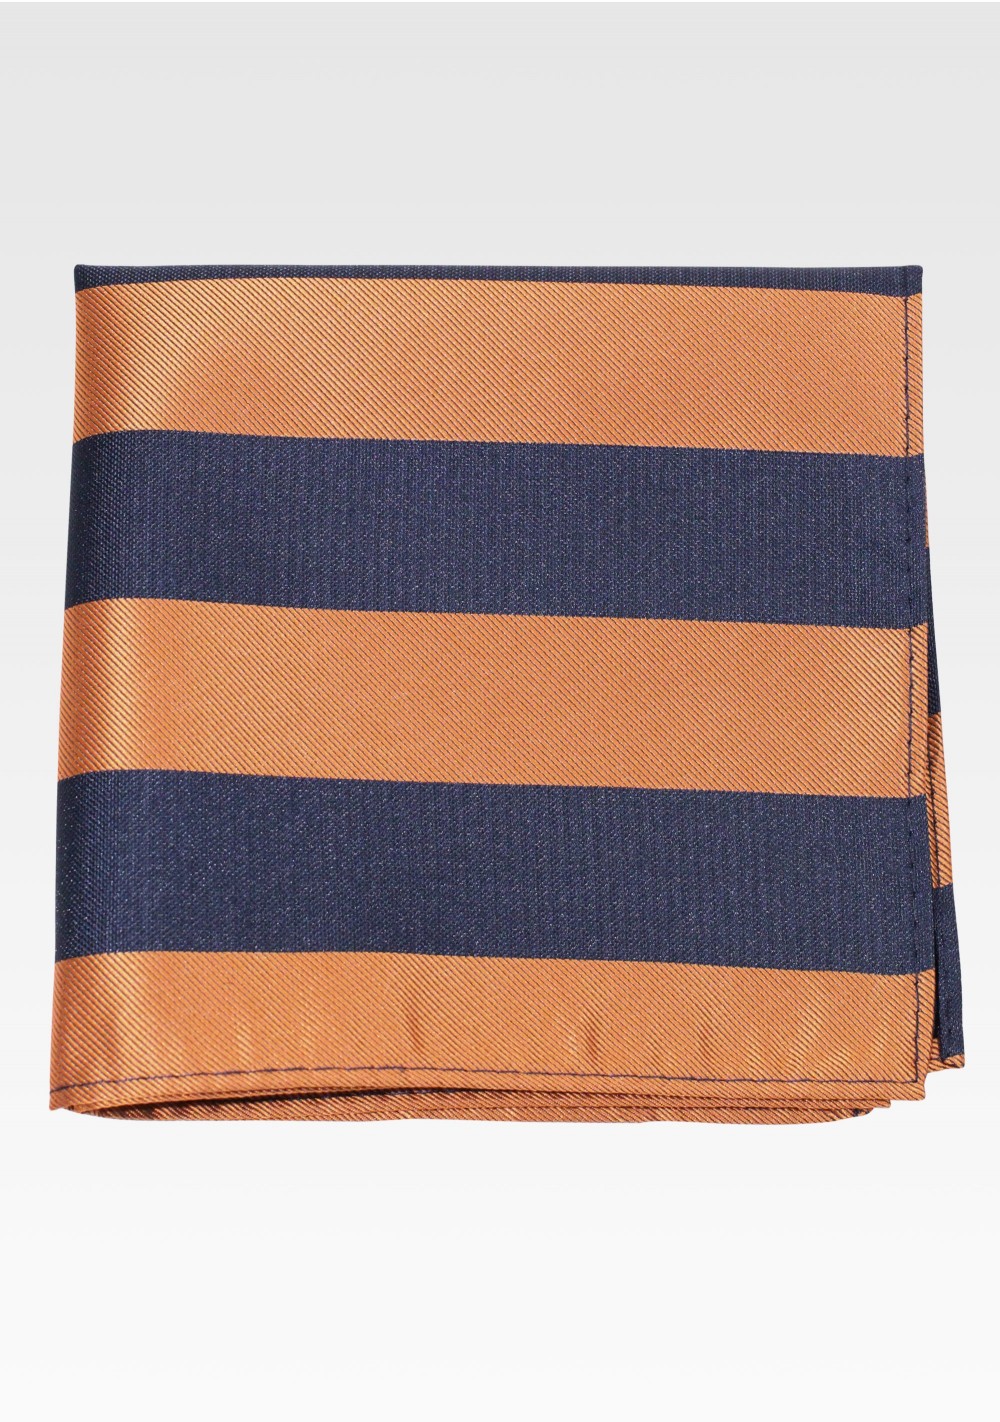 Navy and Rose Gold Striped Pocket Square